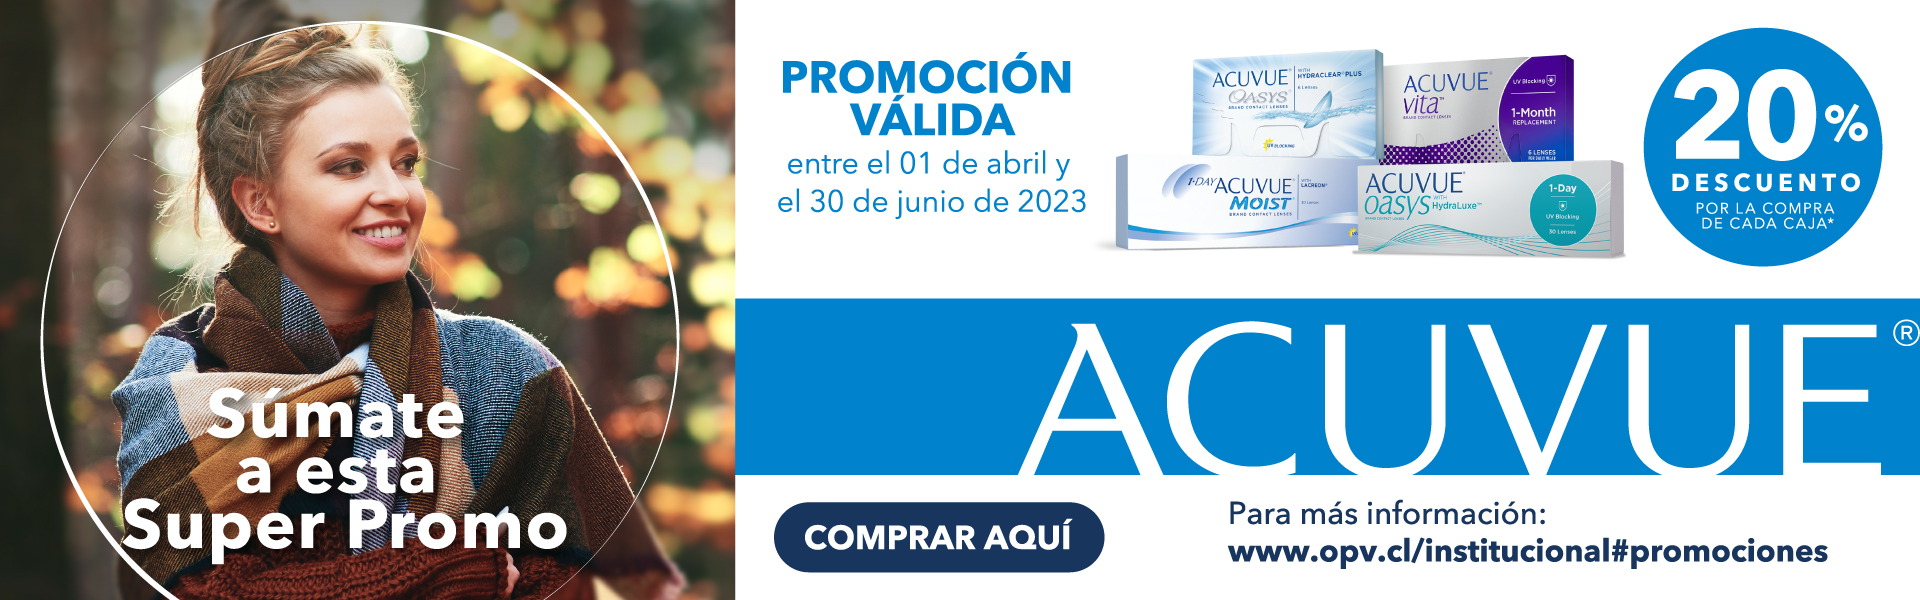 1-Acuvue